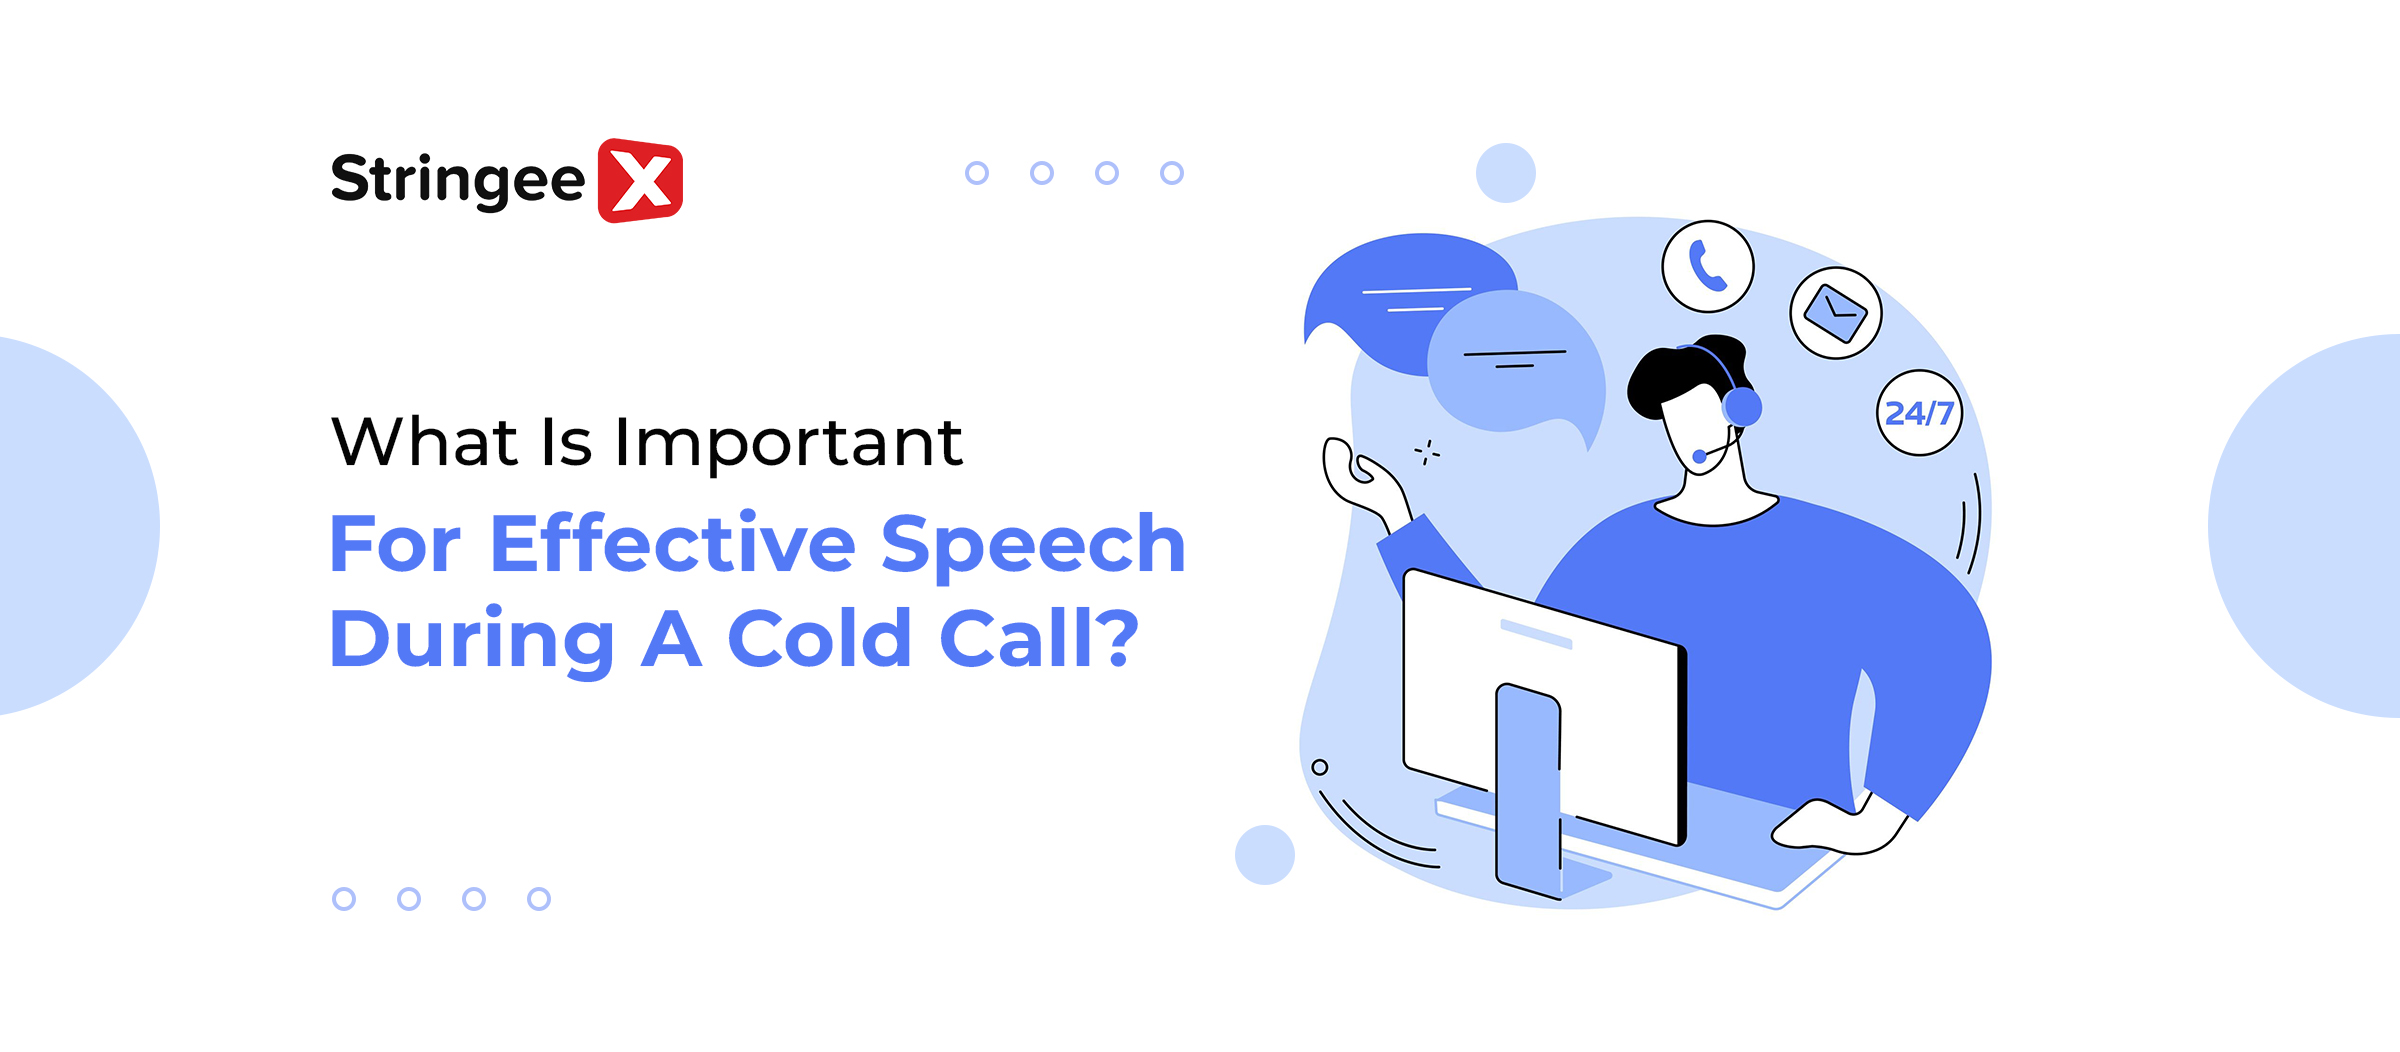 What Is Important For Effective Speech During A Cold Call?